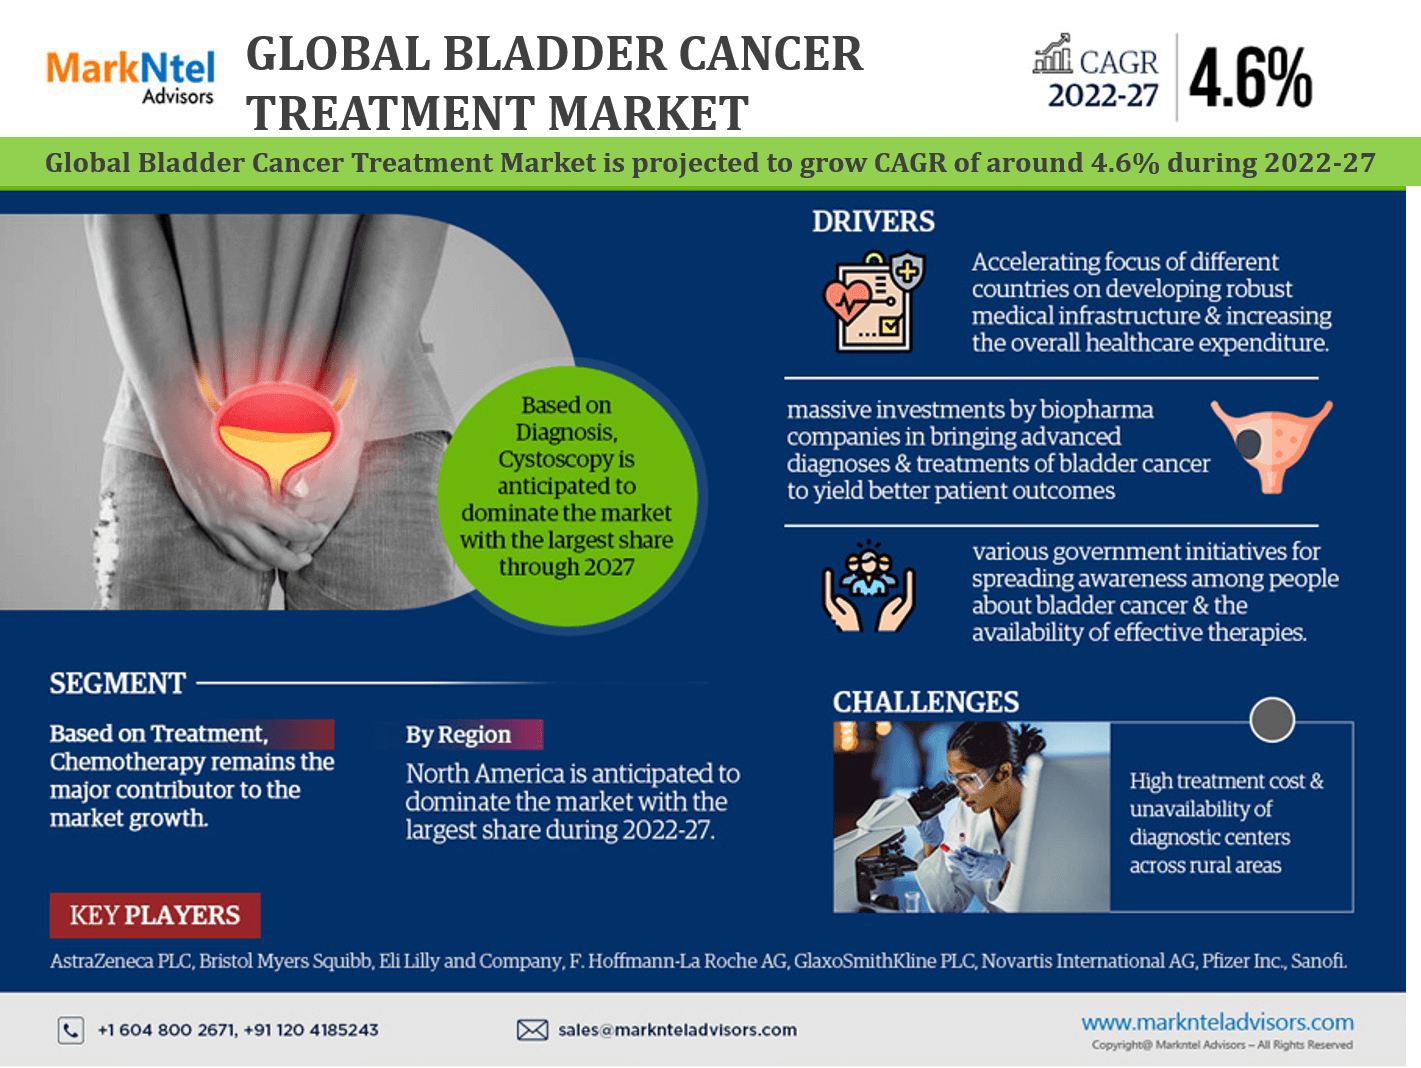 Bladder Cancer Treatment Market Size, Share, Growth, Future and Analysis Forecast 2022-2027